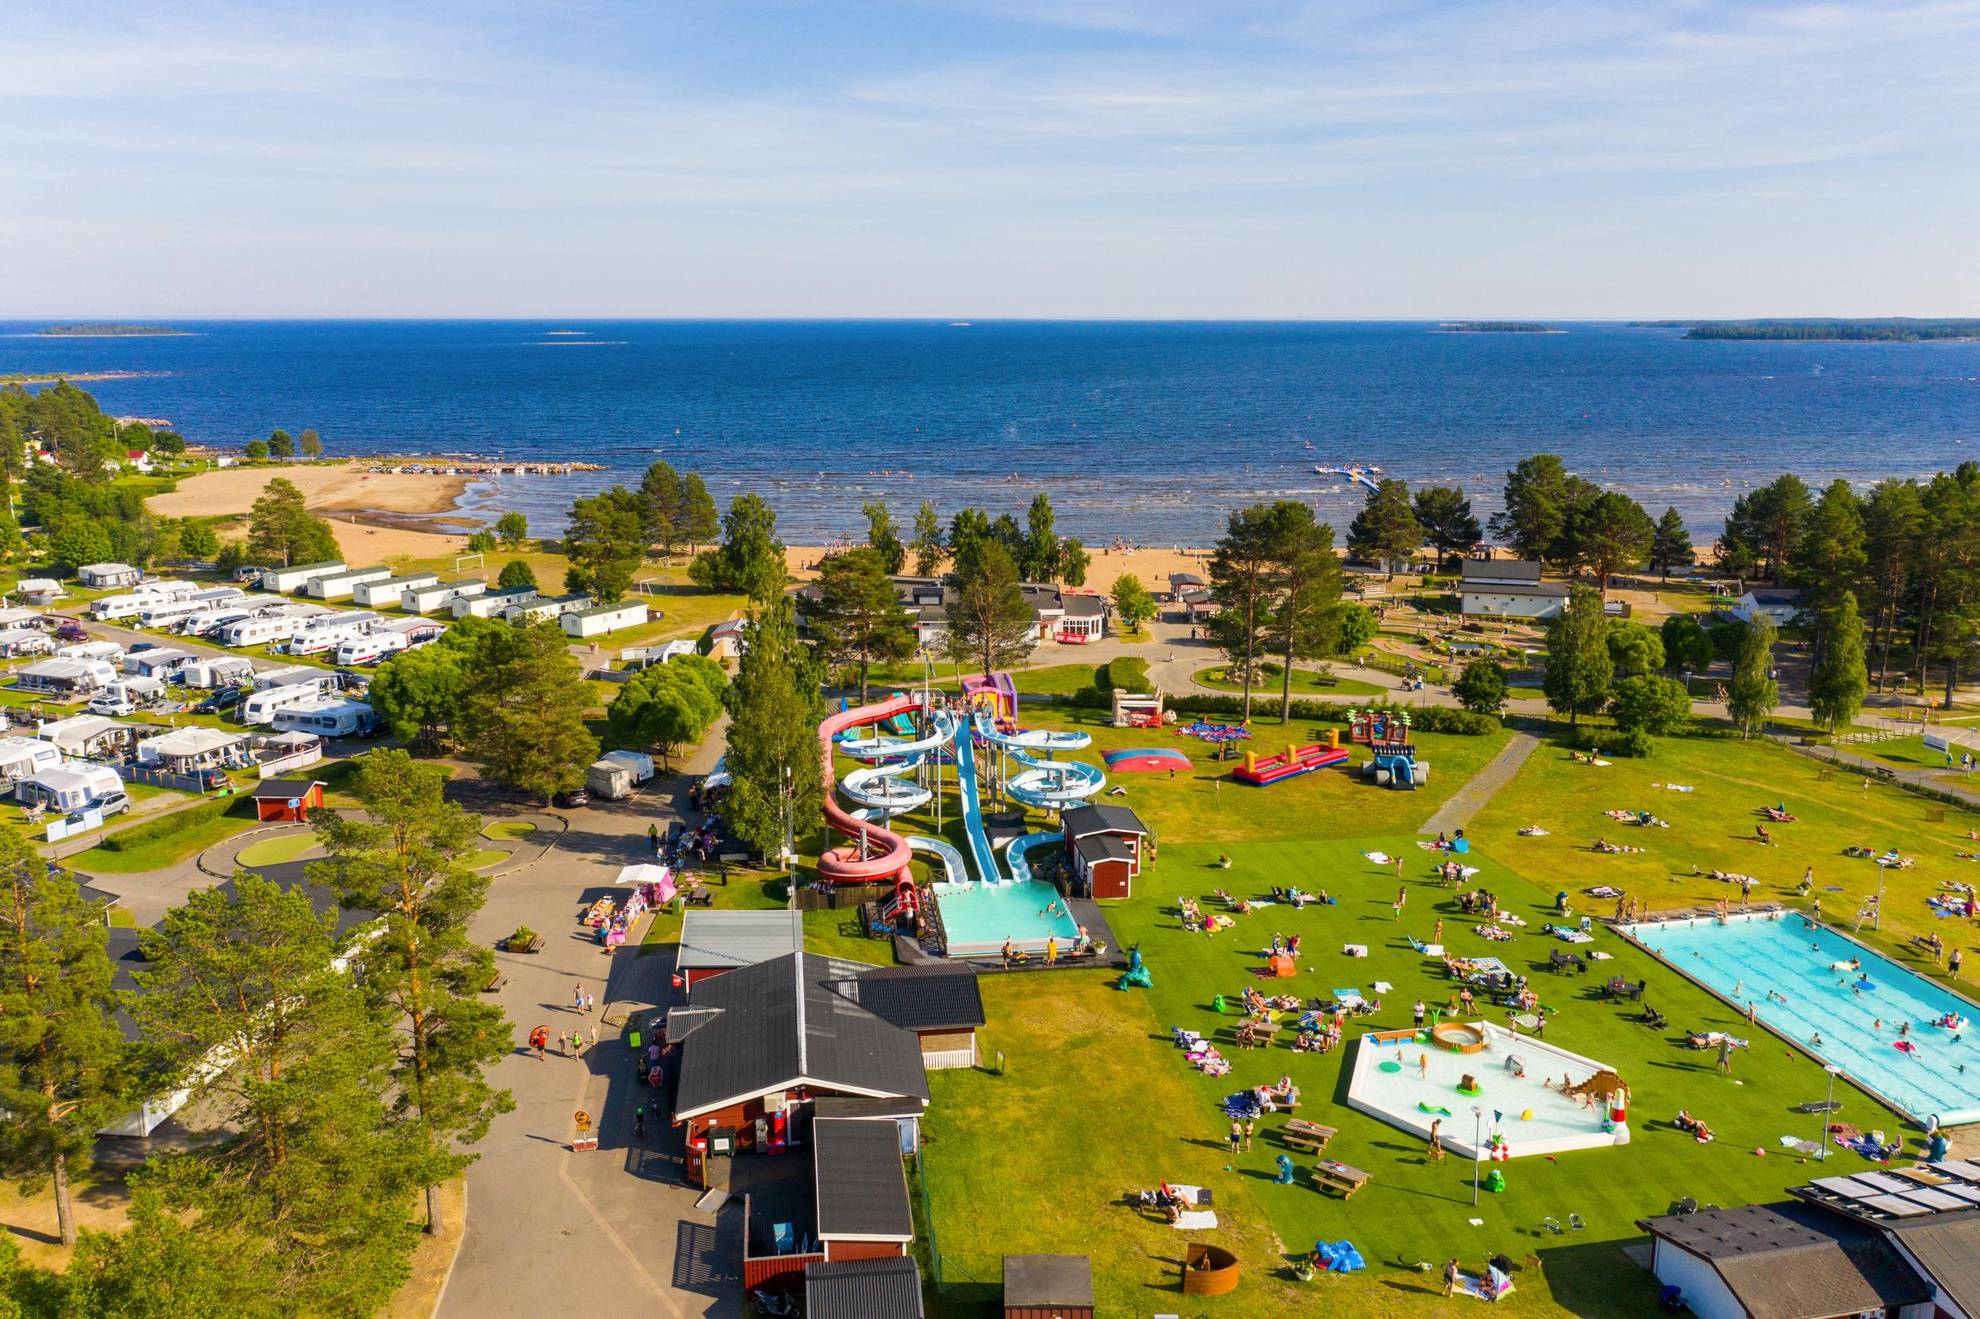 An aerial view of Byske Camping during the summer.